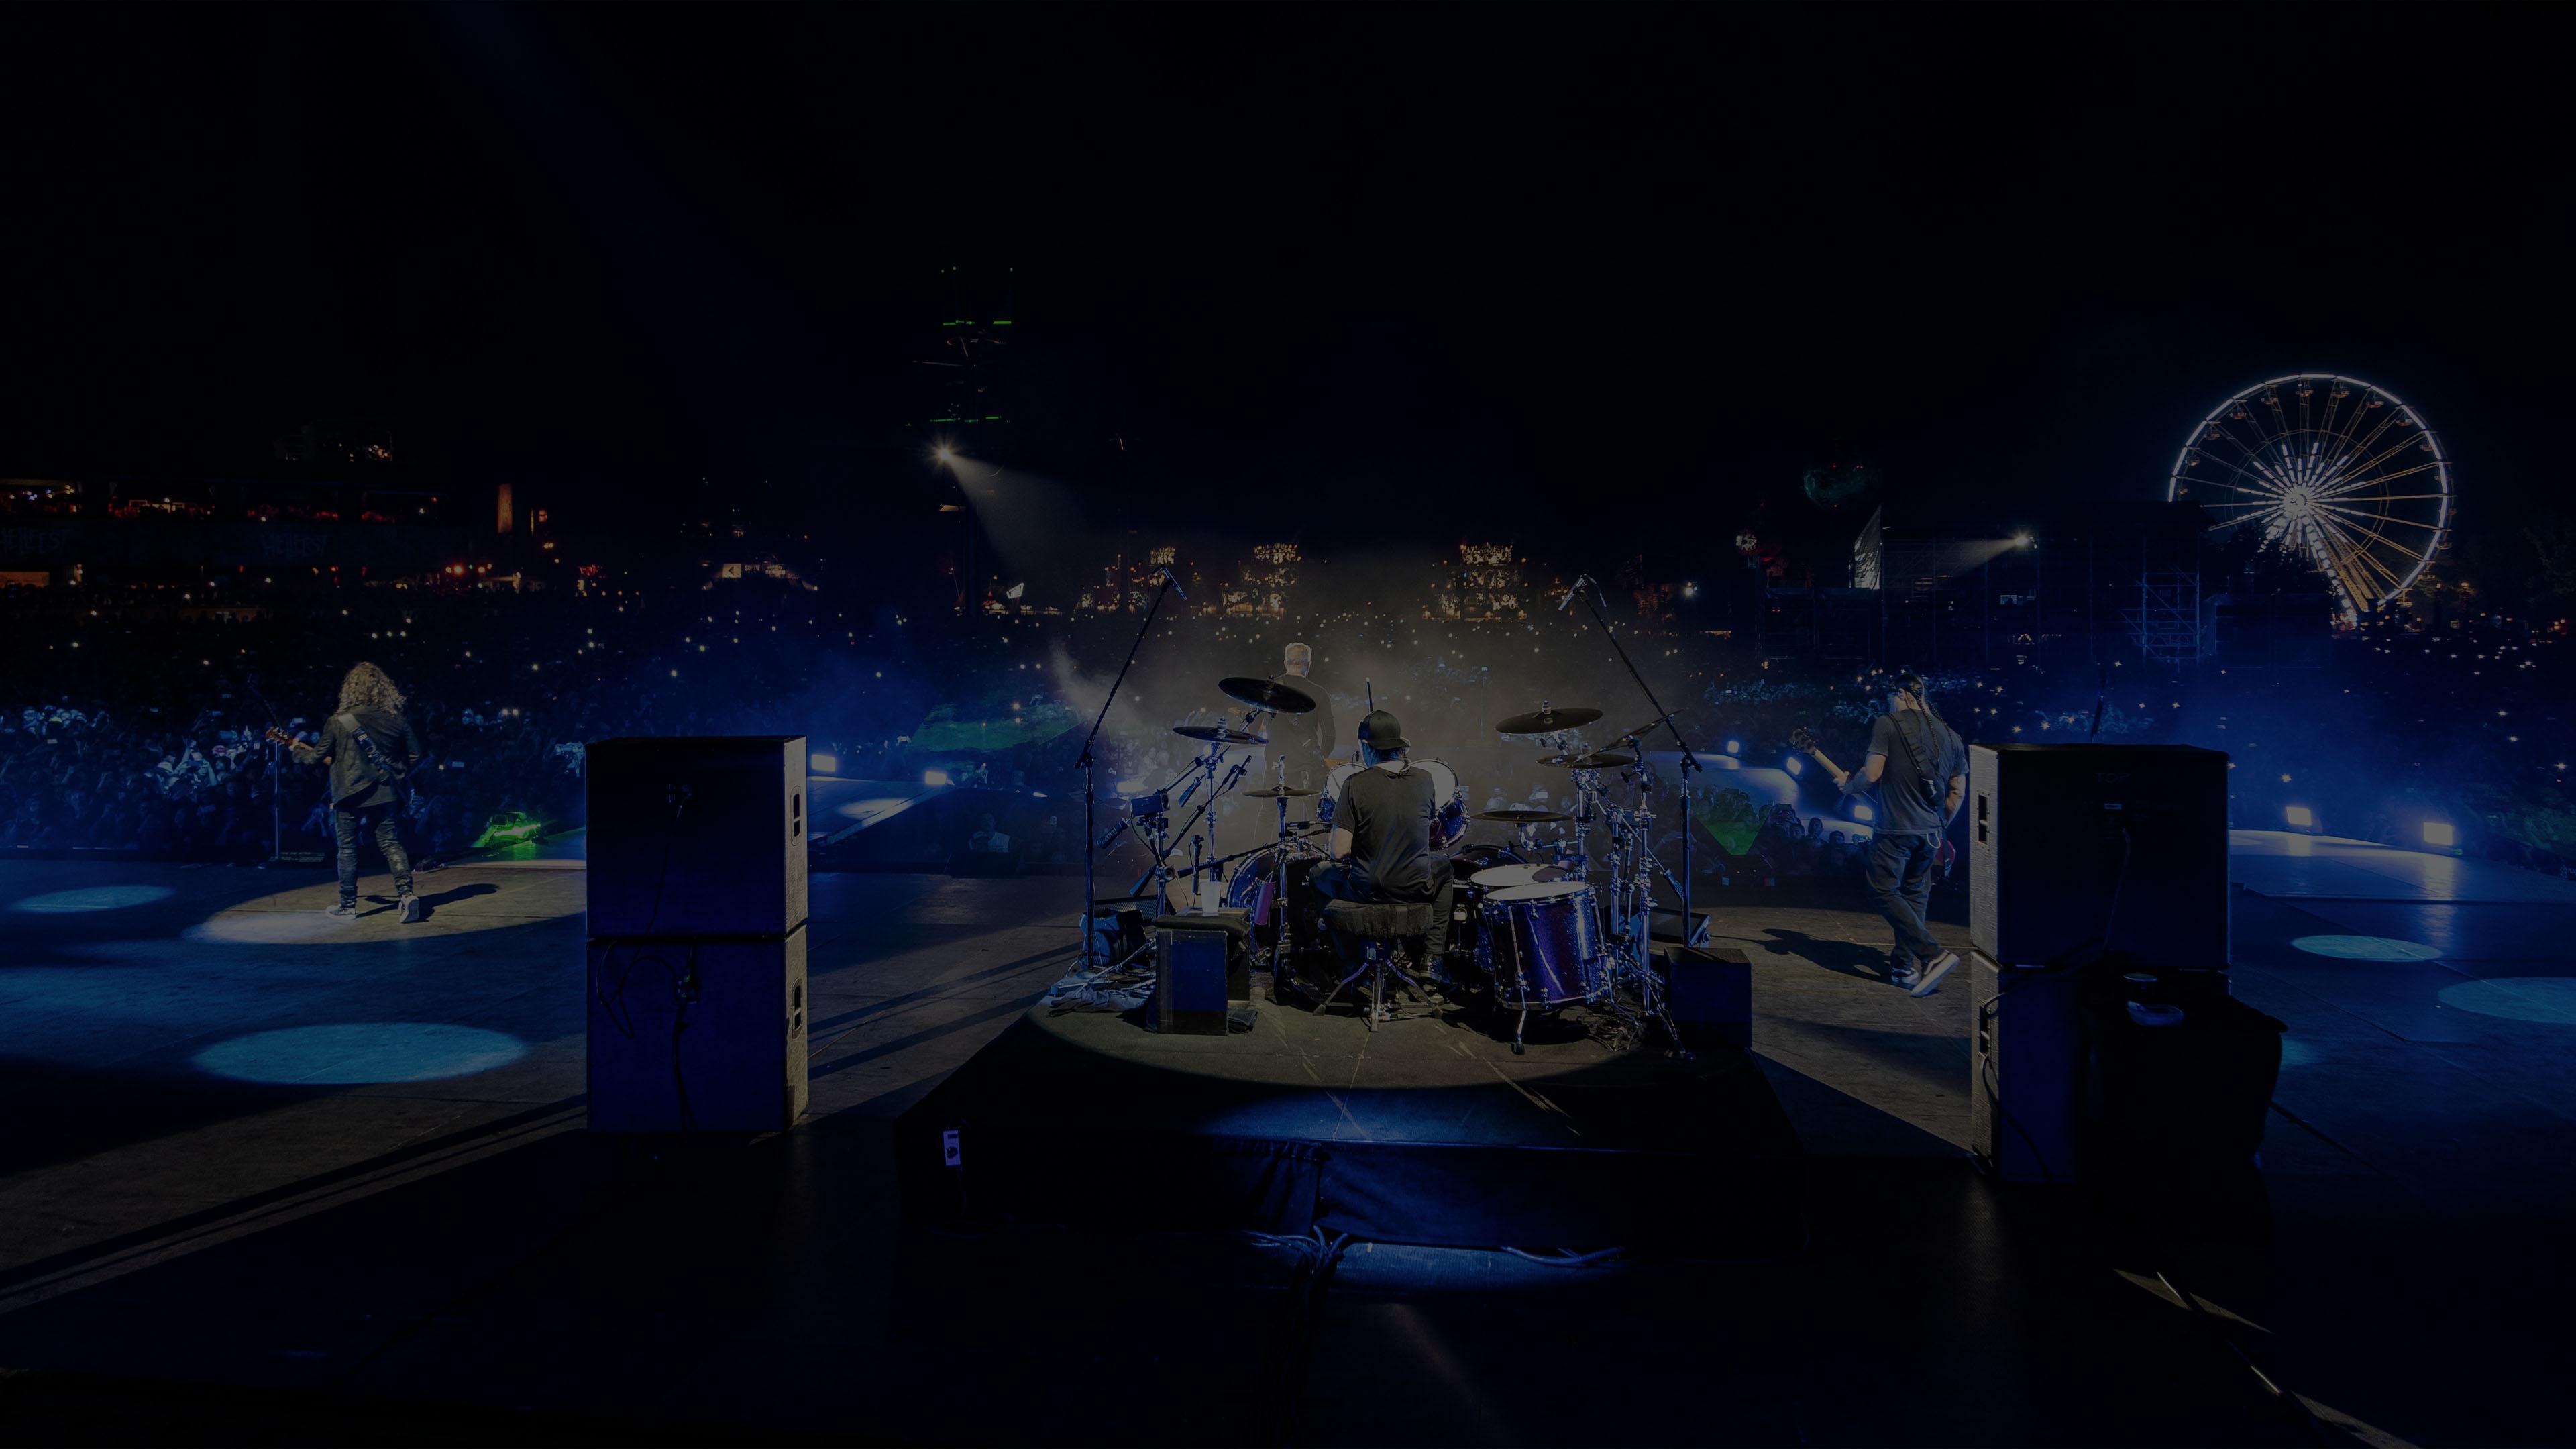 Banner Image for the photo gallery from the gig in Clisson, France shot on June 26, 2022